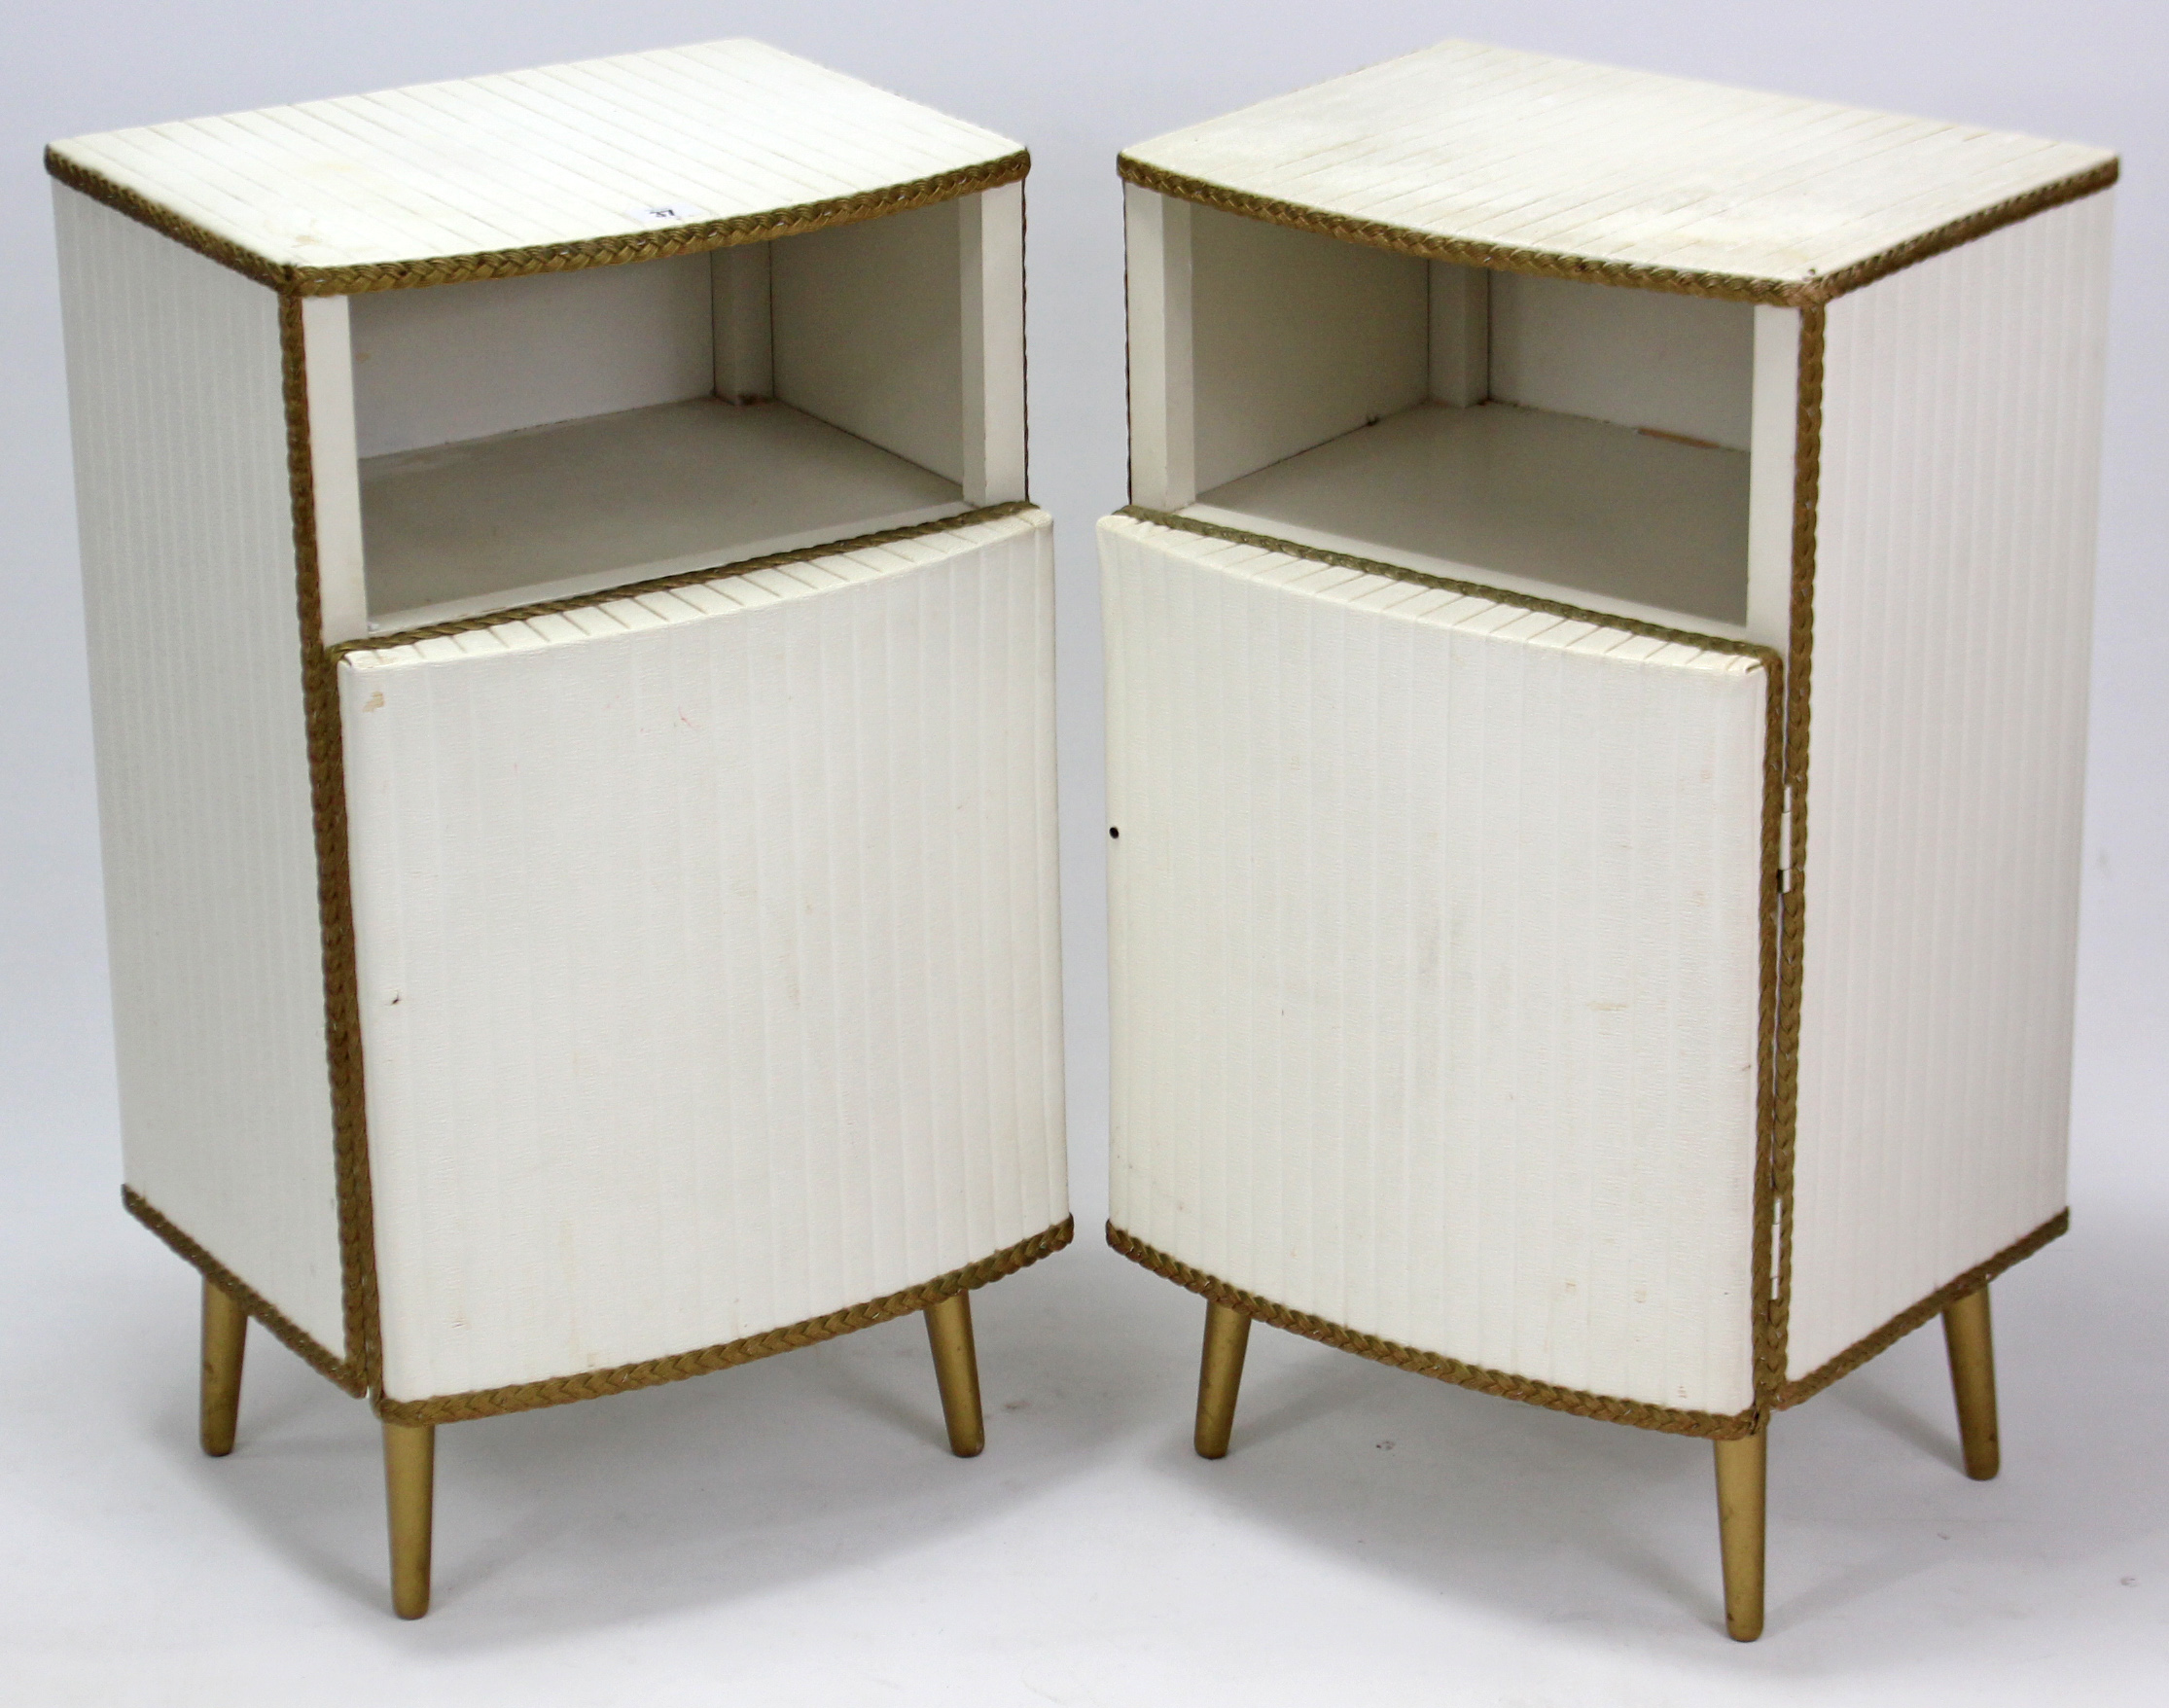 A pair of white & gold-finish bedside cabinets; & a pair of wooden folding chairs.